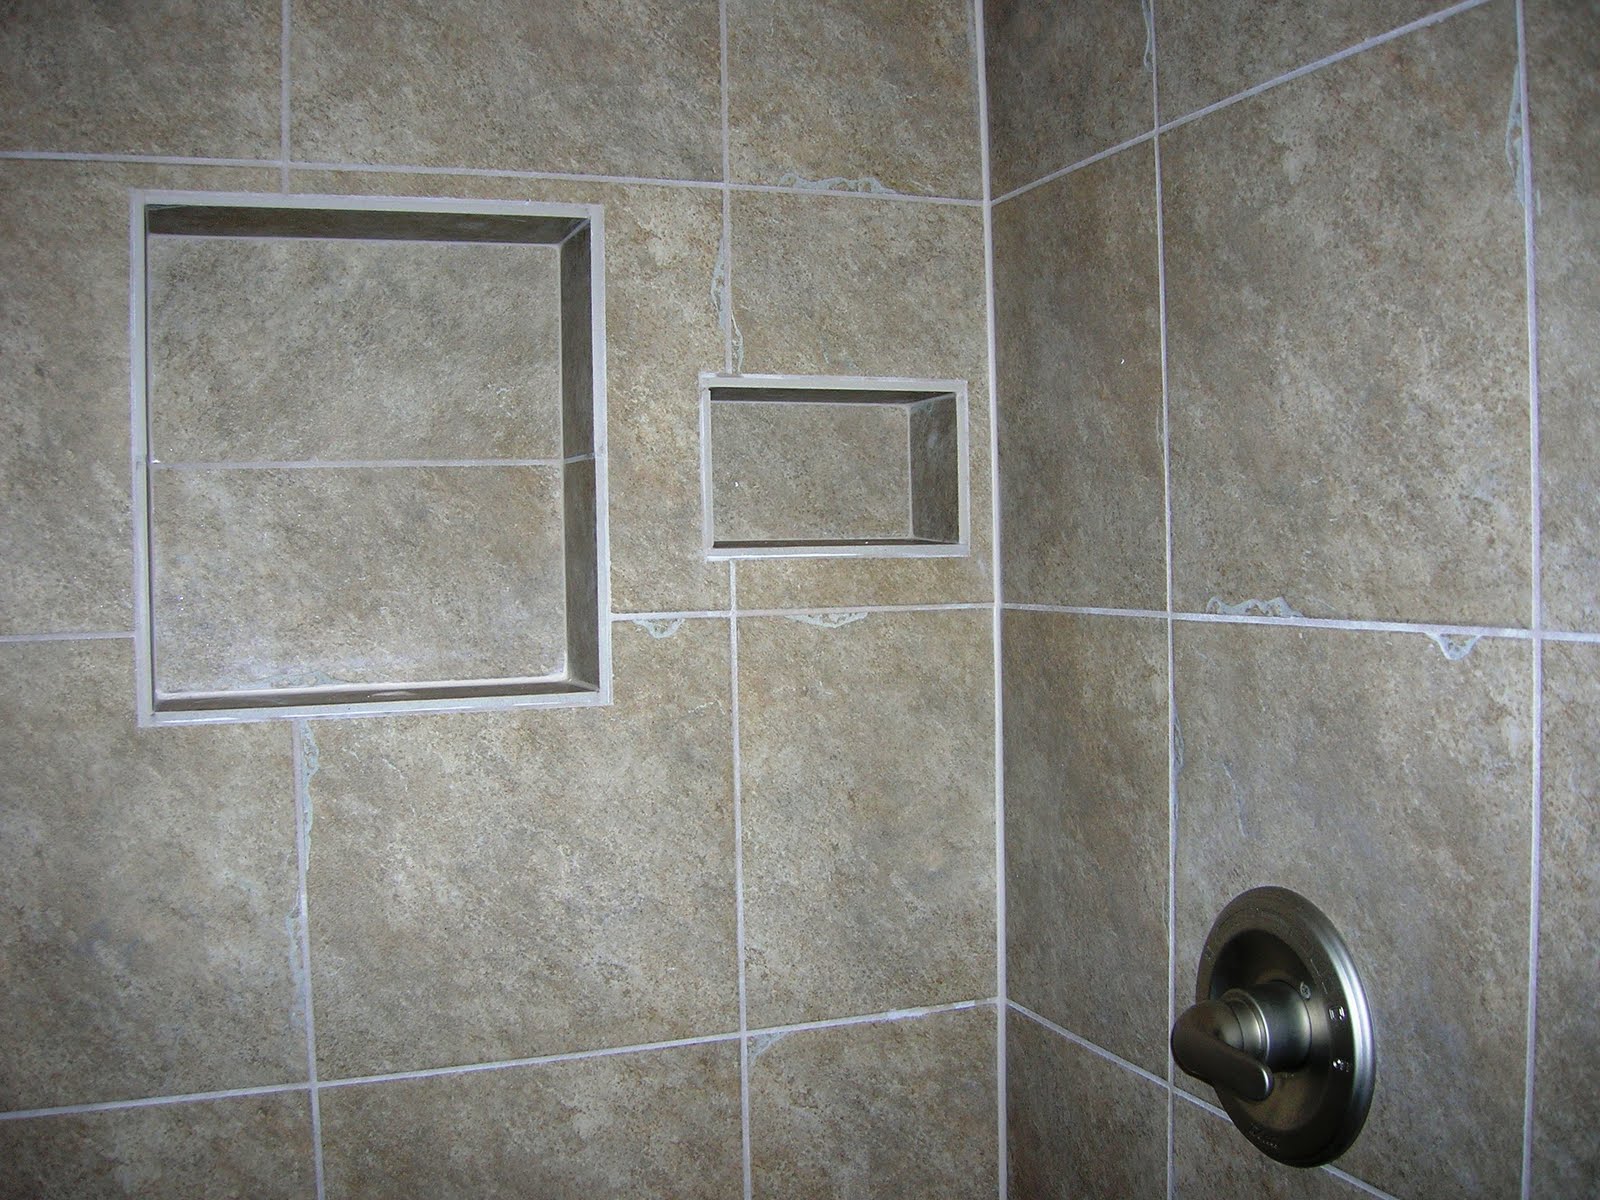 30 nice pictures and ideas of modern bathroom wall tile design pictures